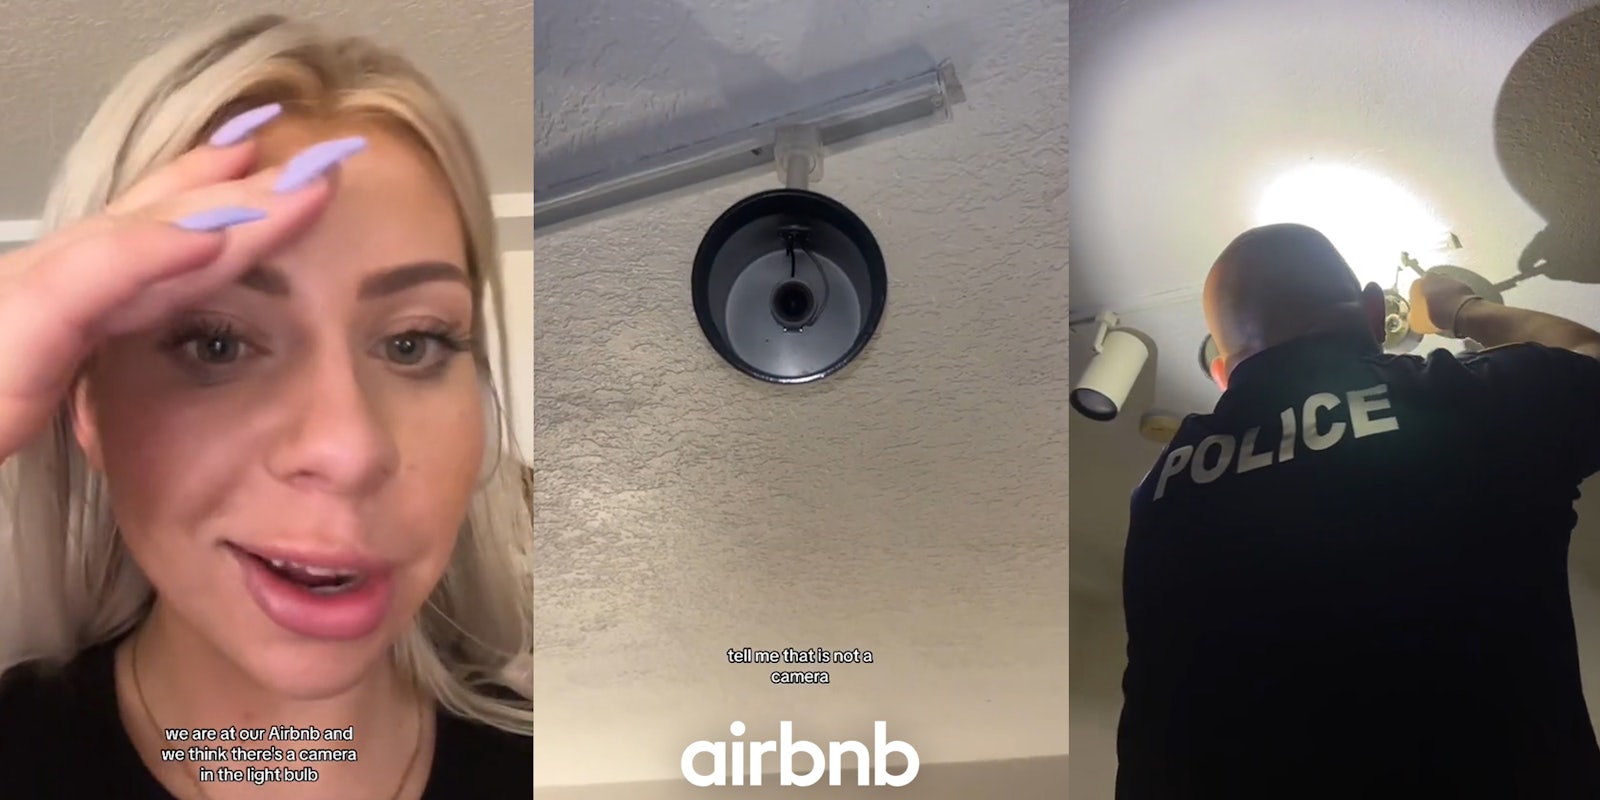 Airbnb guest speaking with caption 'we are at our Airbnb and we think there's a camera in the light bulb' (l) camera in light fixture with caption 'tell me that is not a camera' with Airbnb logo at bottom (c) police officer taking apart Airbnb light fixture (r)